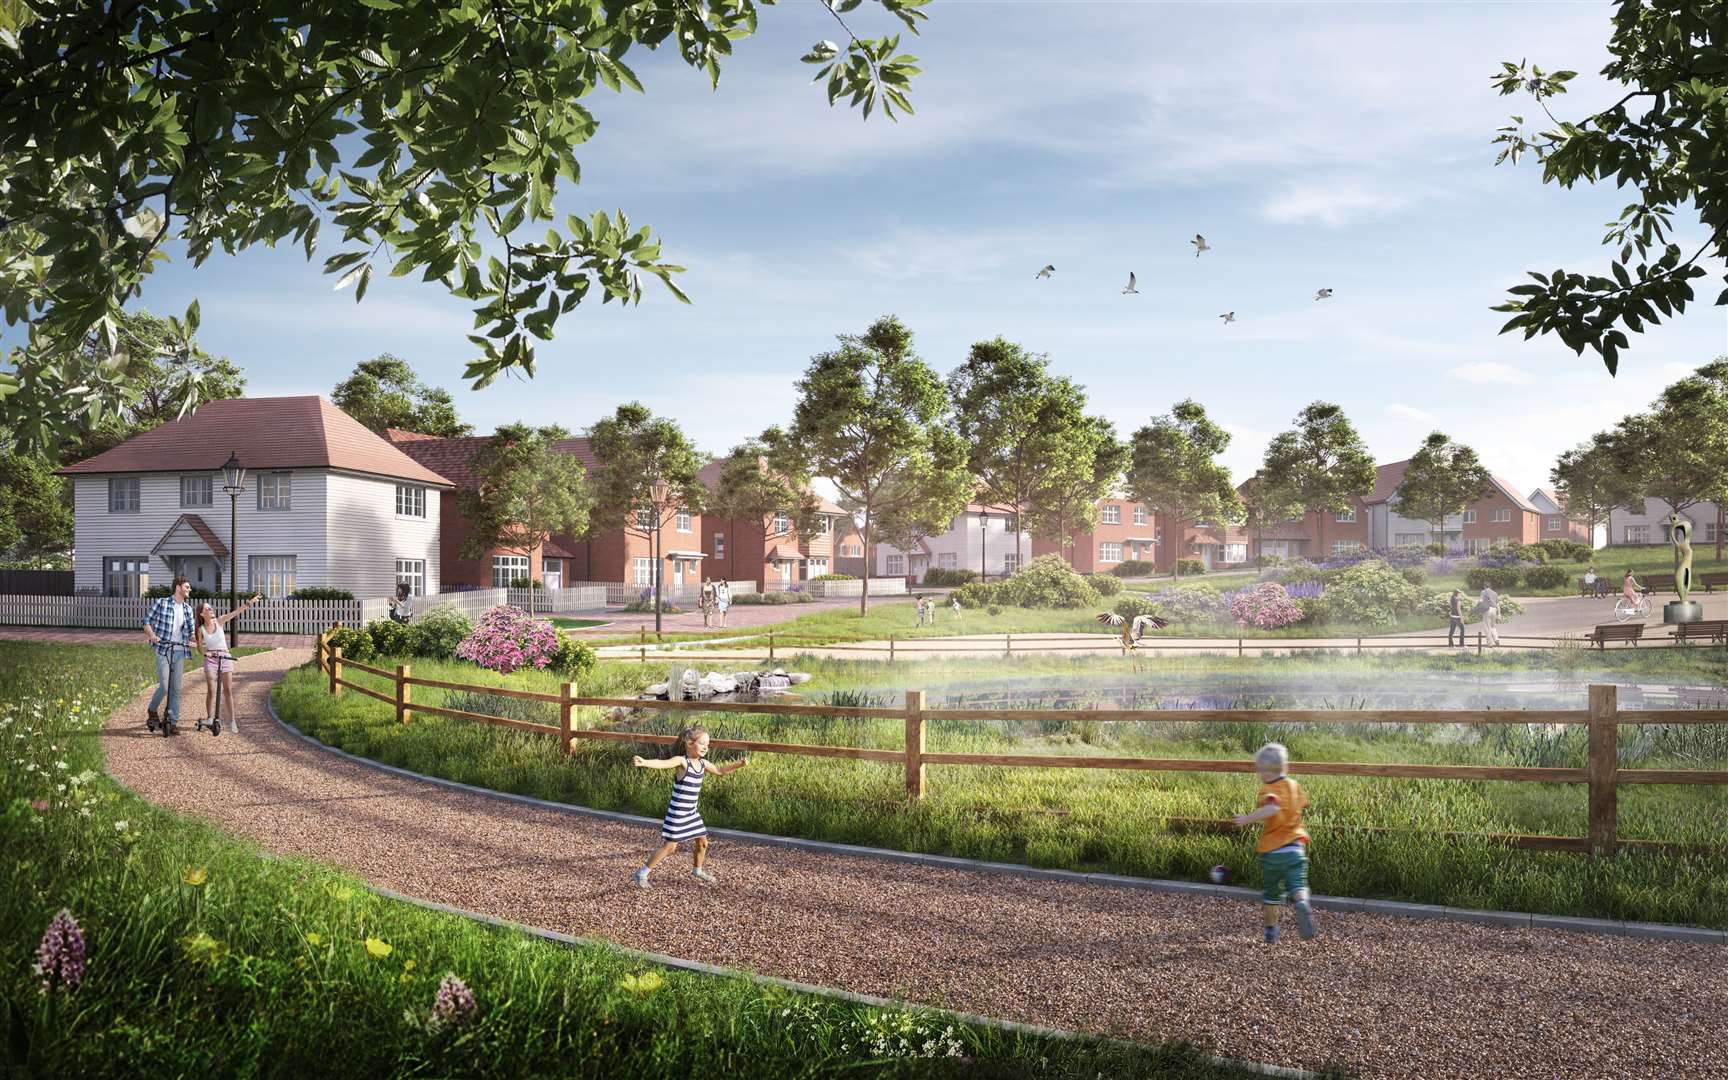 The Large Burton development in Ashford has been held up by the Stodmarsh issue